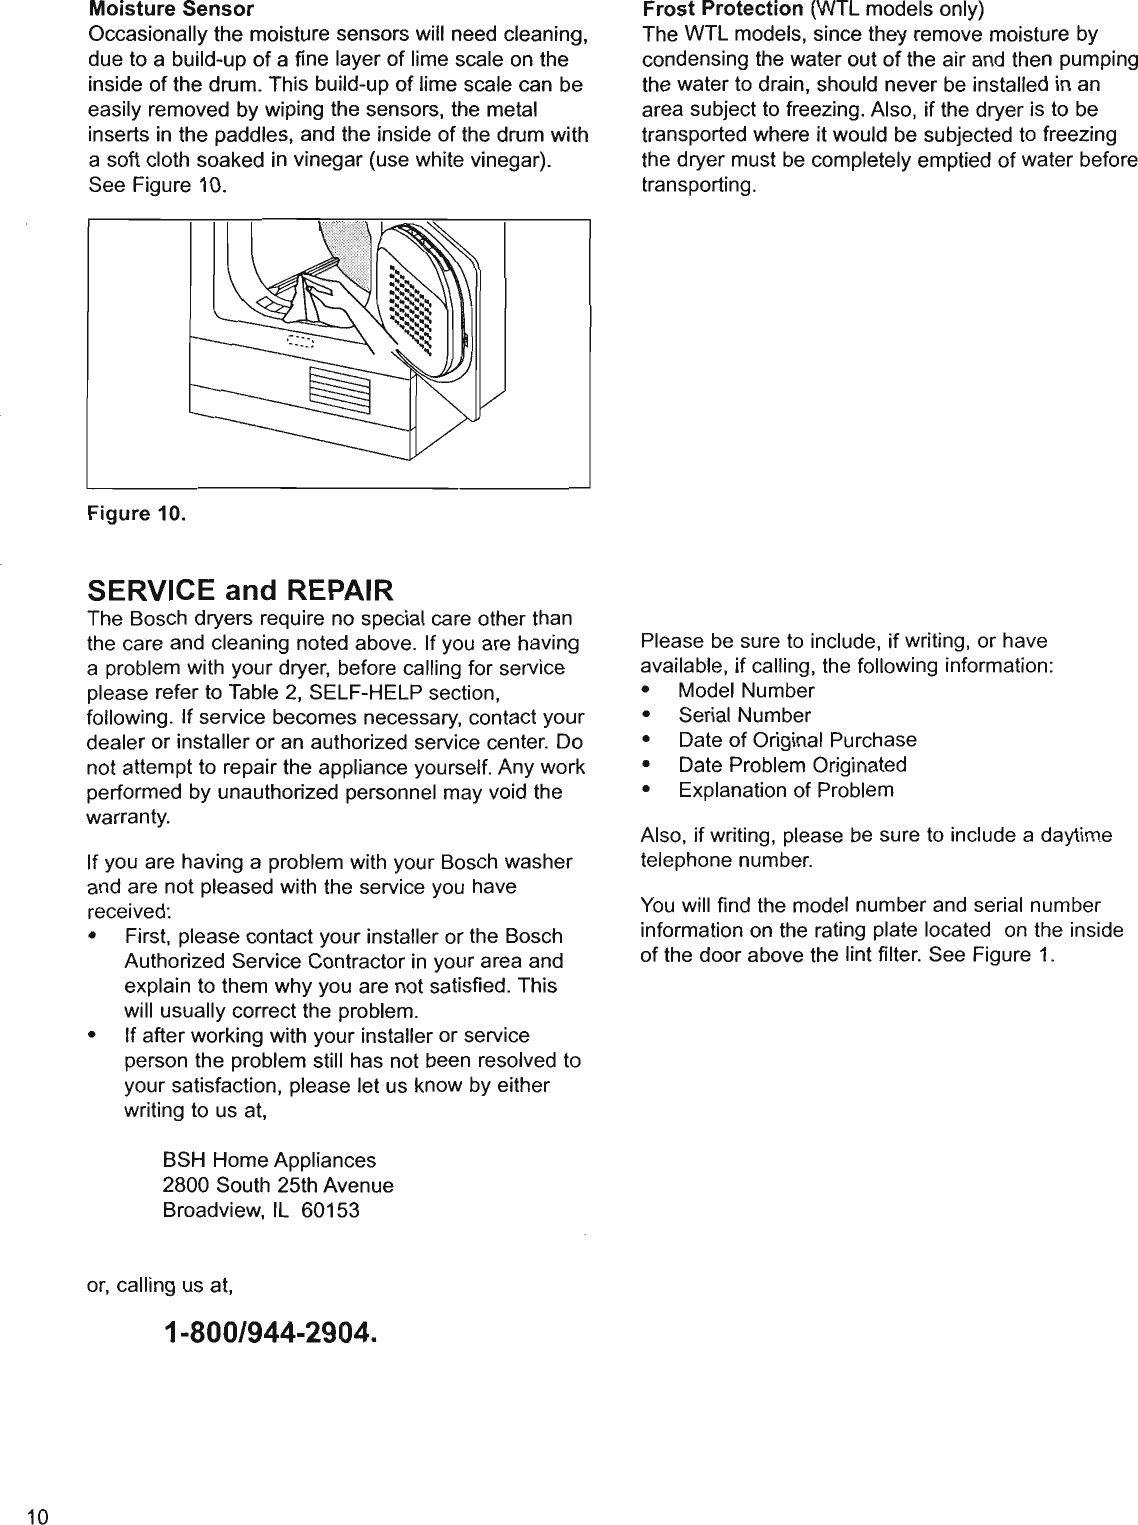 Page 10 of 12 - Boschhome Boschhome-Bosch-Appliances-Clothes-Dryer-Wta-3500-Users-Manual- Use & Care Manual For Bosch WTA 3500 And WTL 5400 Dryers  Boschhome-bosch-appliances-clothes-dryer-wta-3500-users-manual